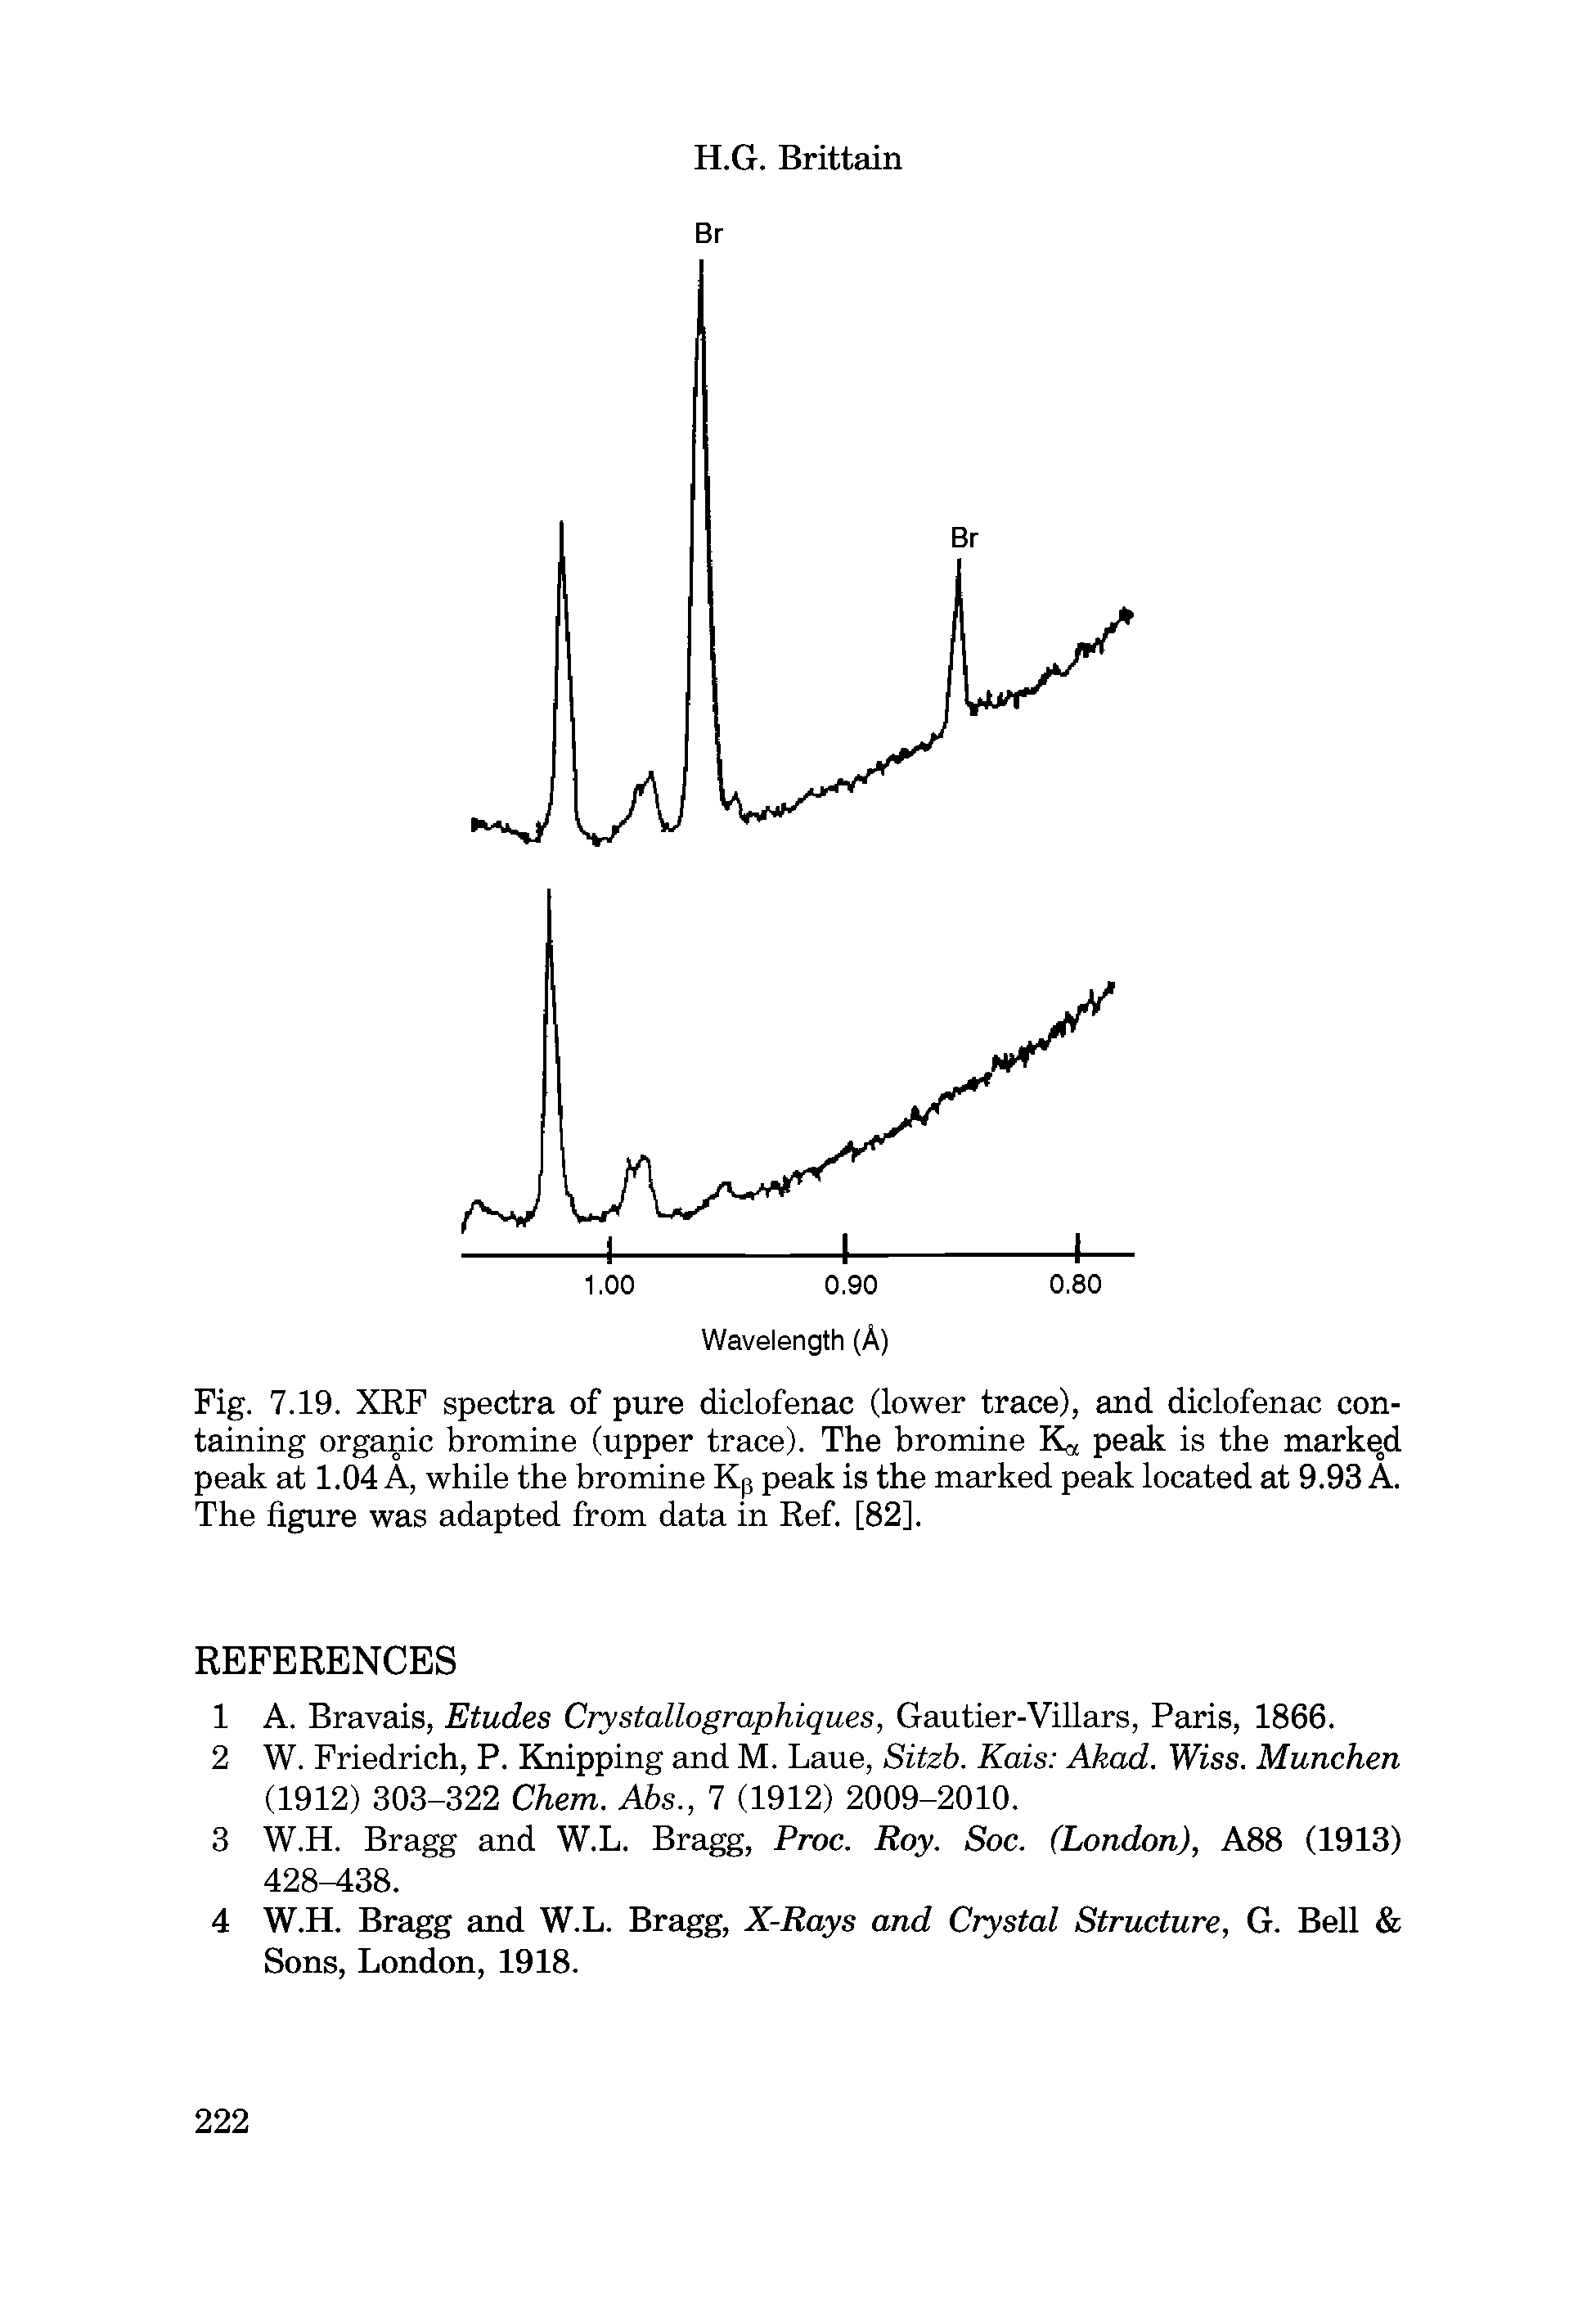 Fig. 7.19. XRF spectra of pure diclofenac (lower trace), and diclofenac containing organic bromine (upper trace). The bromine Ko, peak is the markeod peak at 1.04 A, while the bromine Kp peak is the marked peak located at 9.93 A. The figure was adapted from data in Ref. [82].